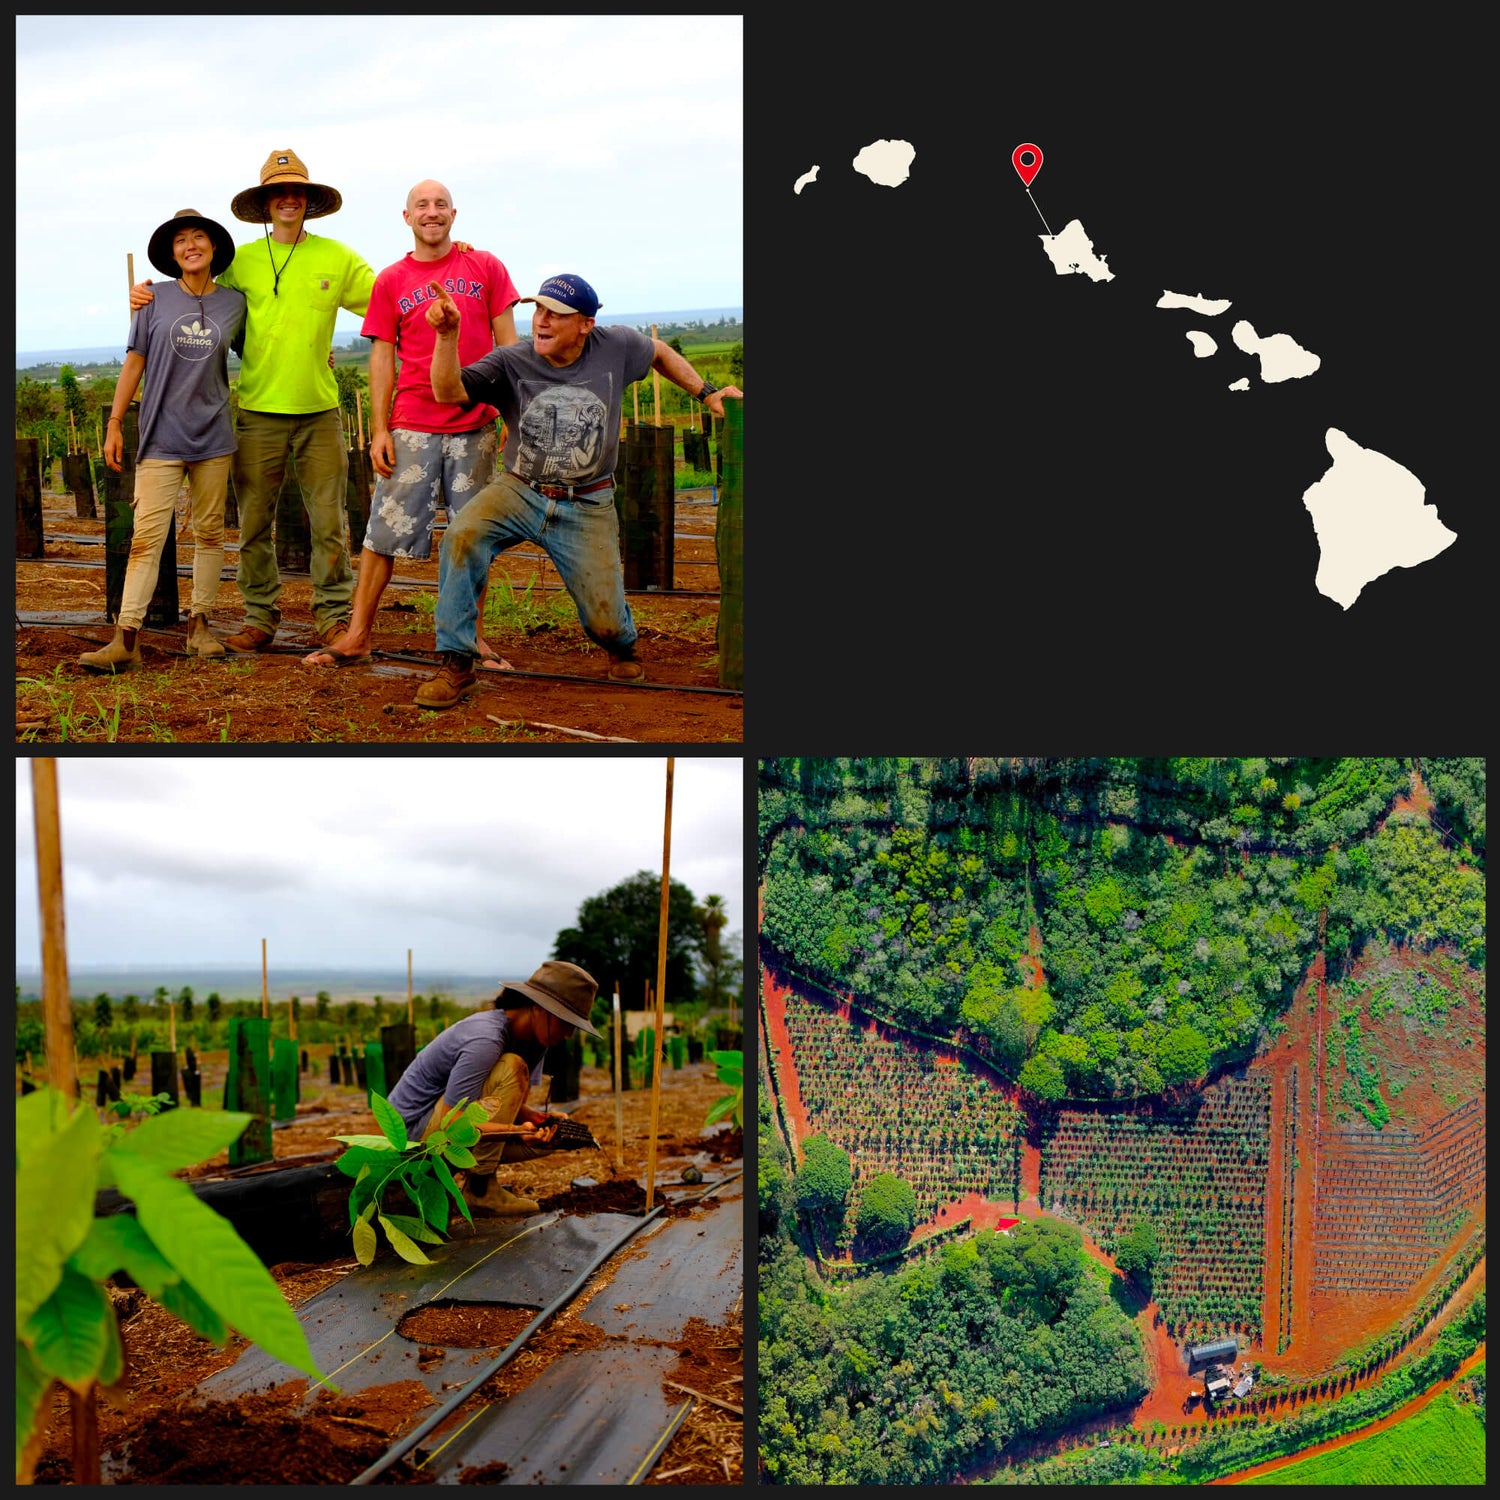 Images of cacao farmers, farmland, and a map of the Hawaiian Islands